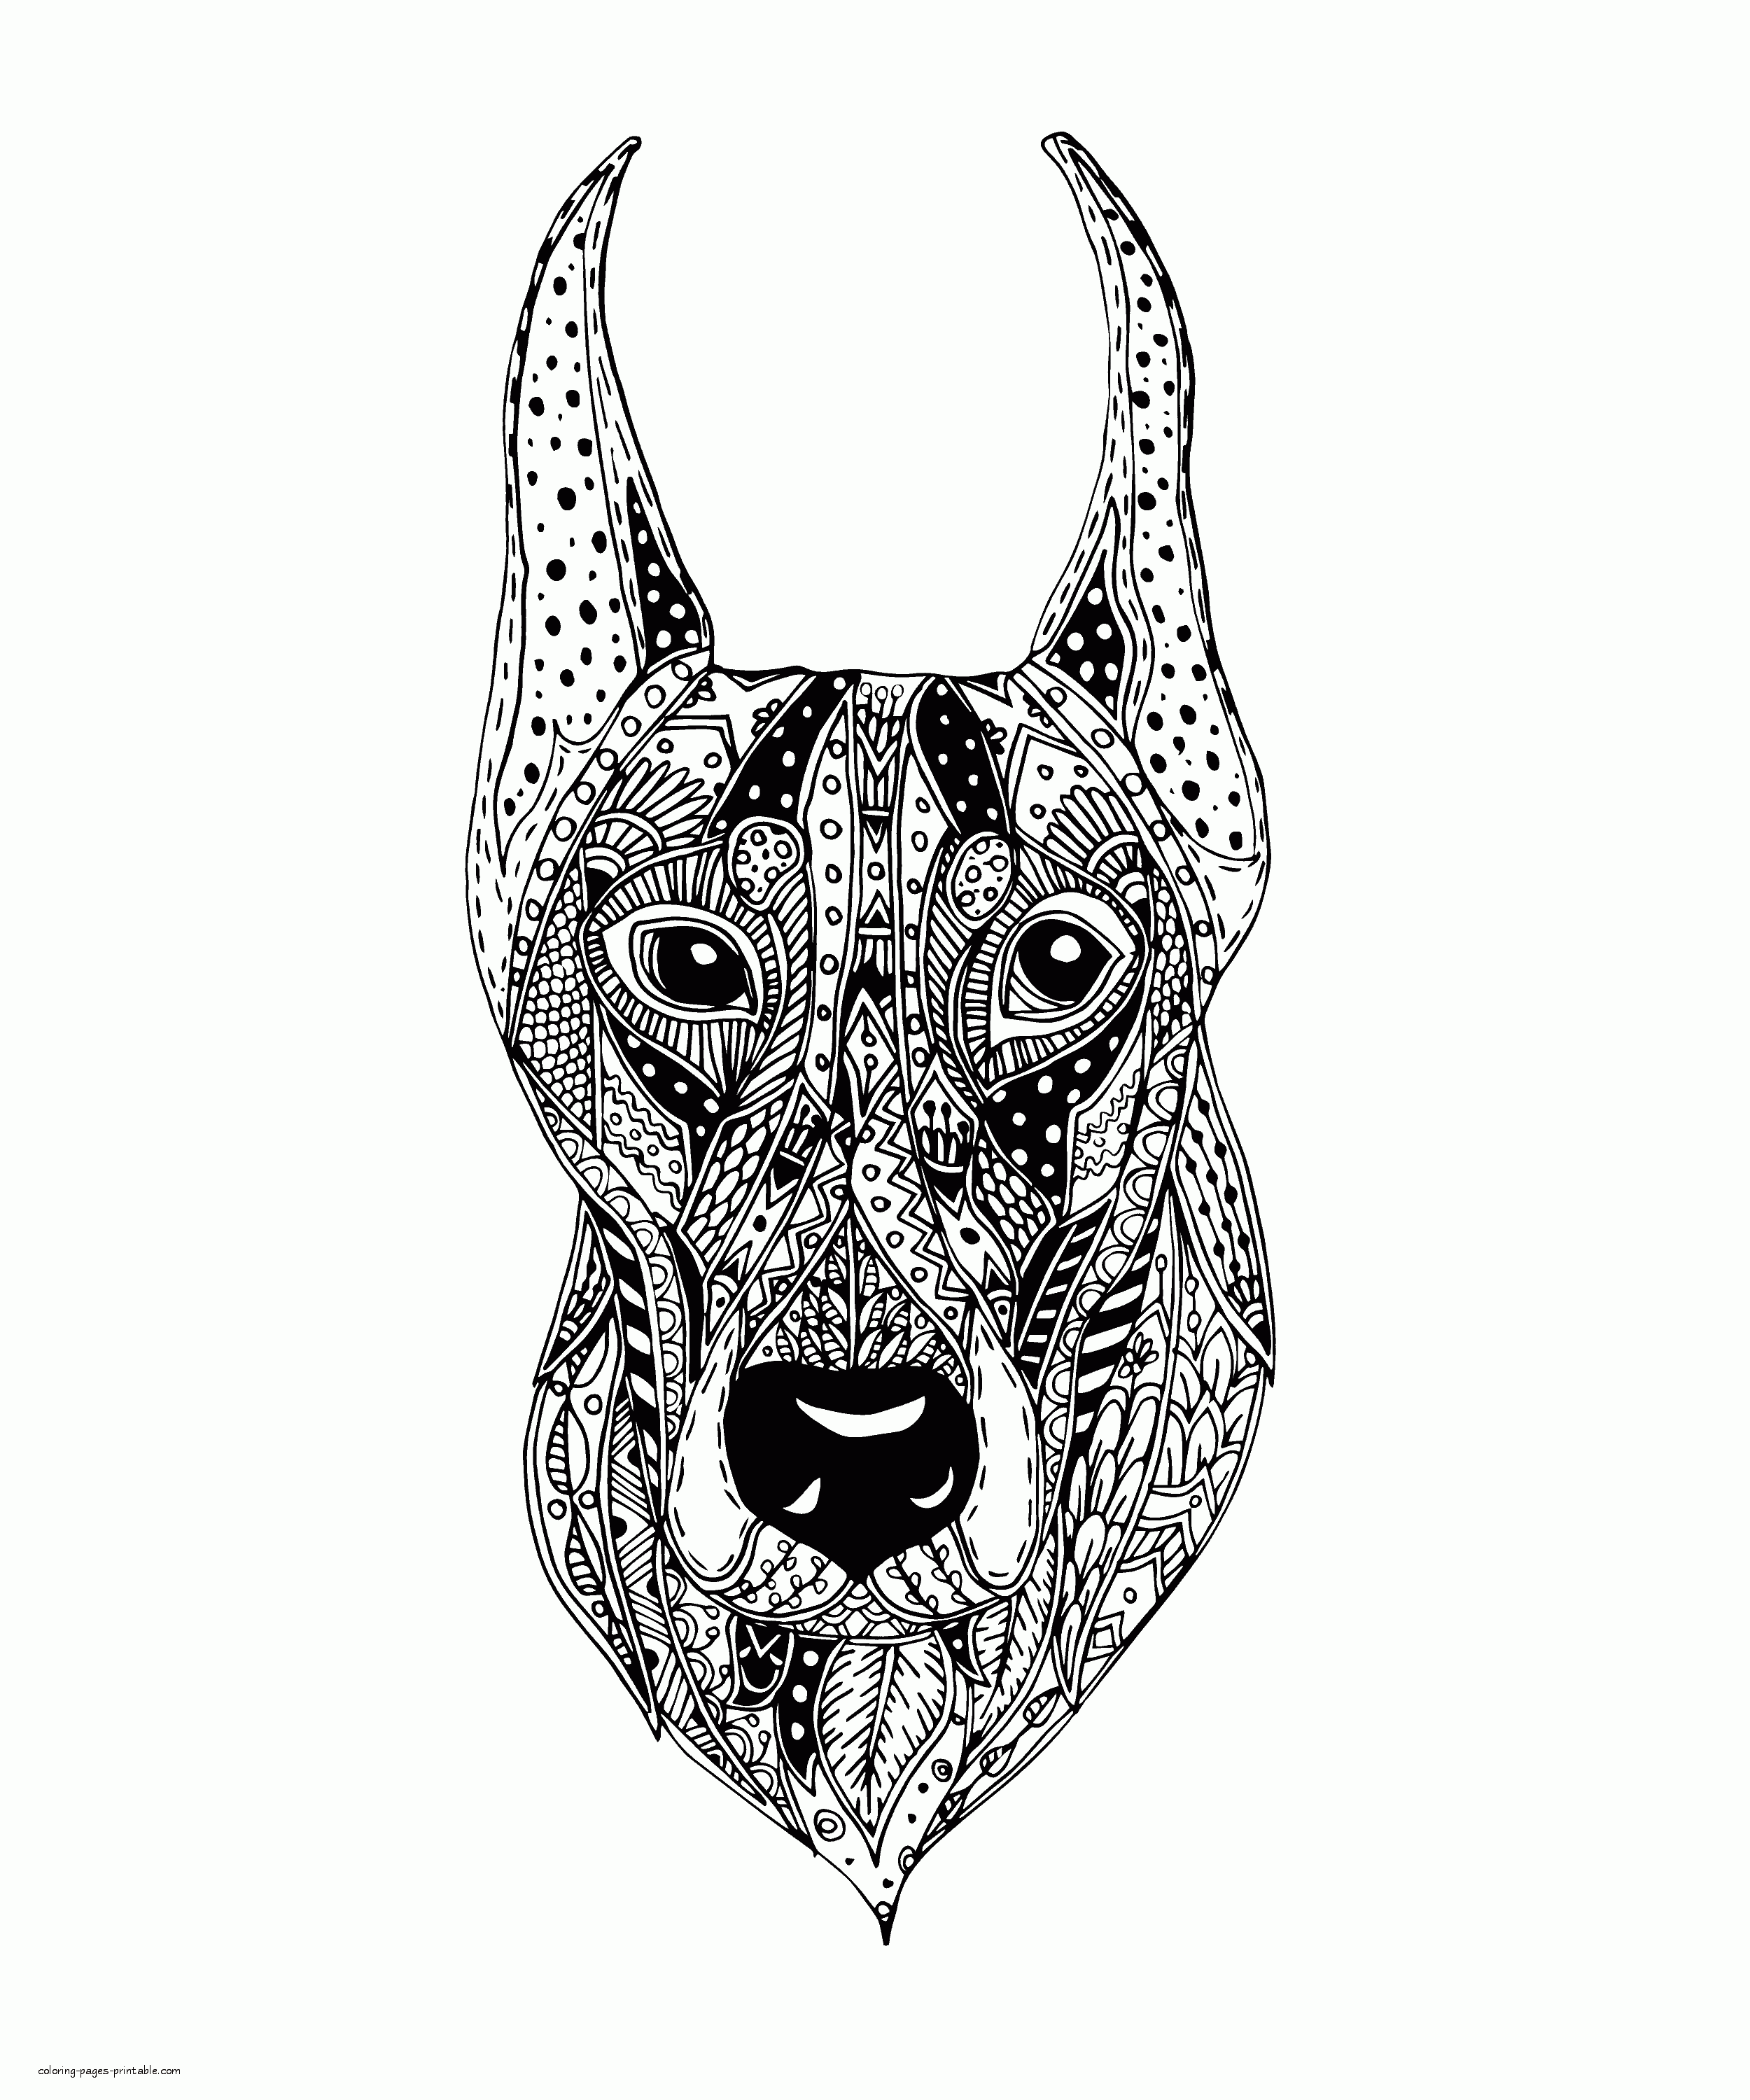 Difficult Dog Coloring Page. Doberman